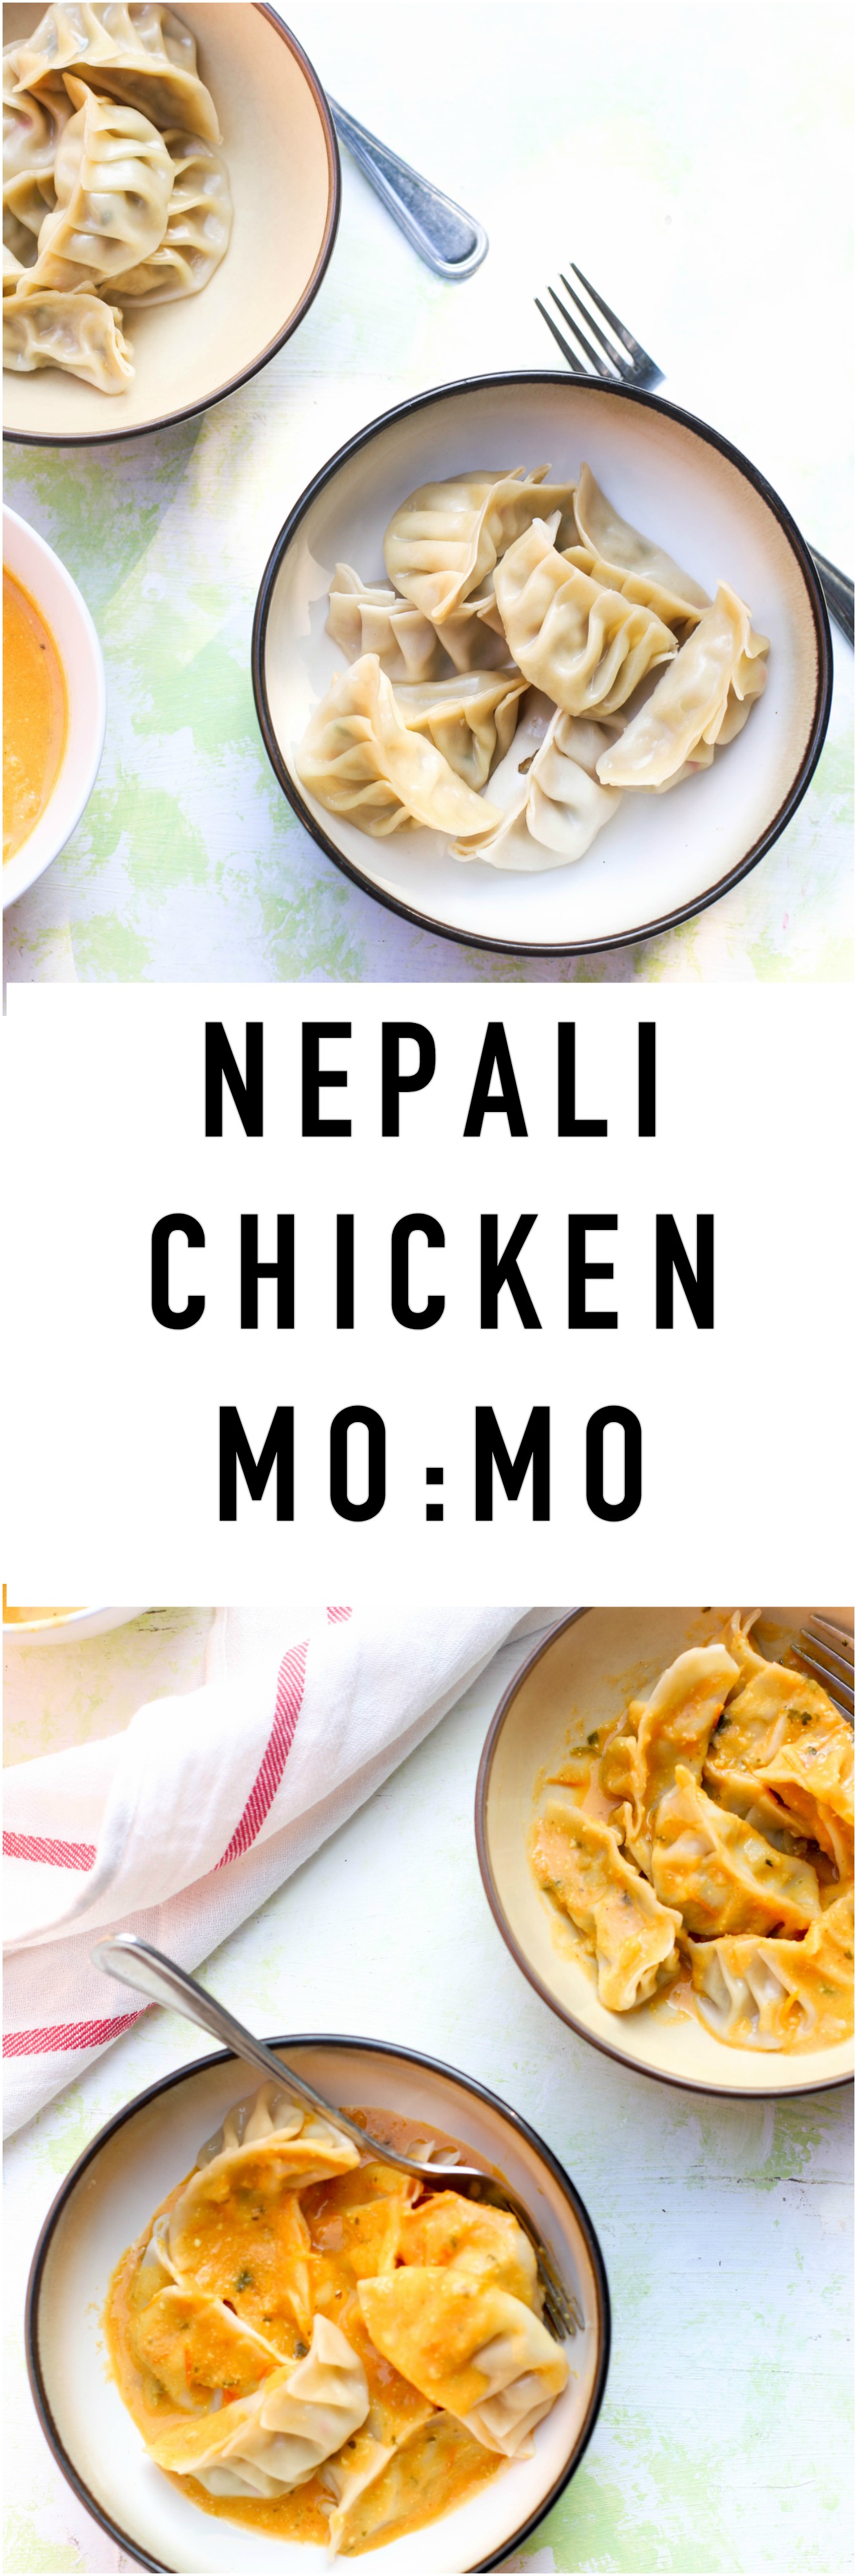 Flavorful &amp; Juicy recipe for Nepali Chicken Mo:Mo (Nepali Dumplings). Step by step recipe and video included.